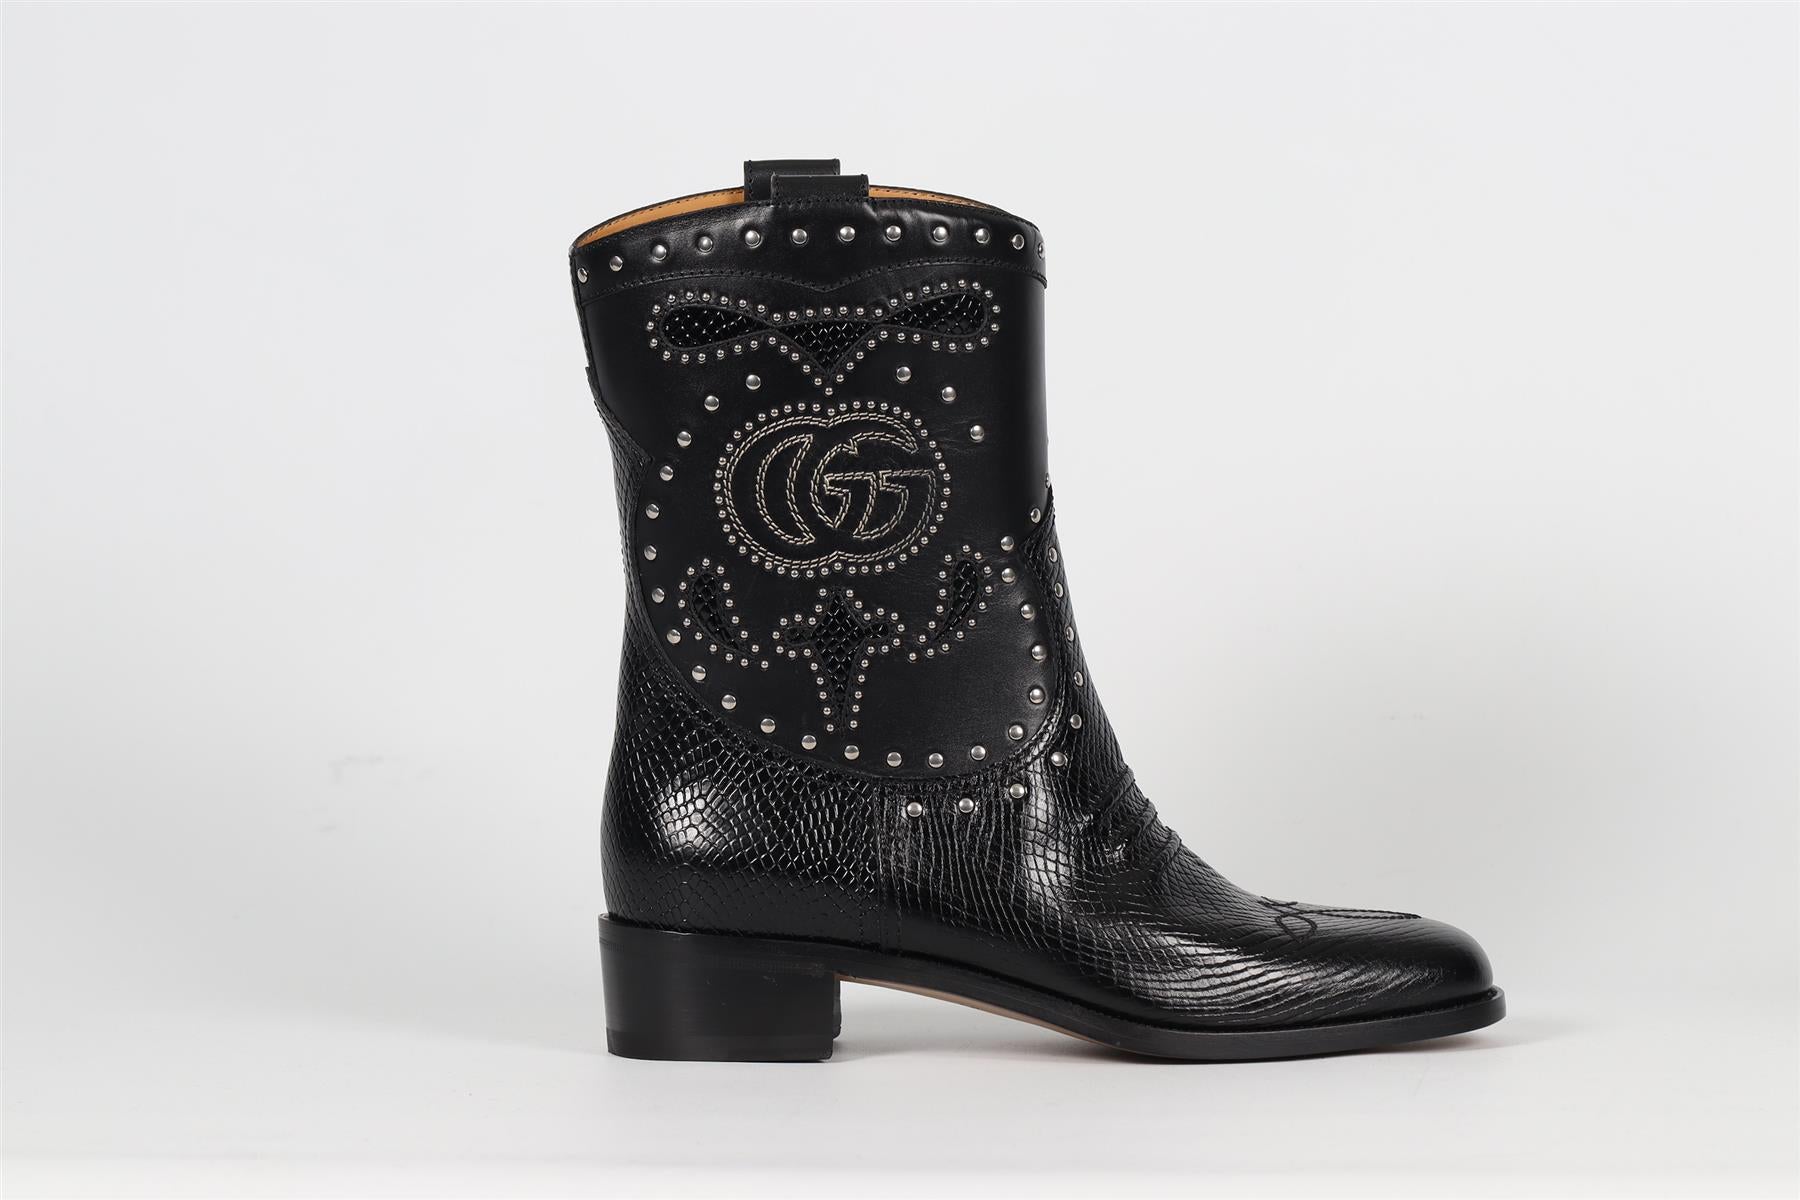 GUCCI SNAKESKIN EFFECT LEATHER BOOTS EU 40 UK 7 US 10